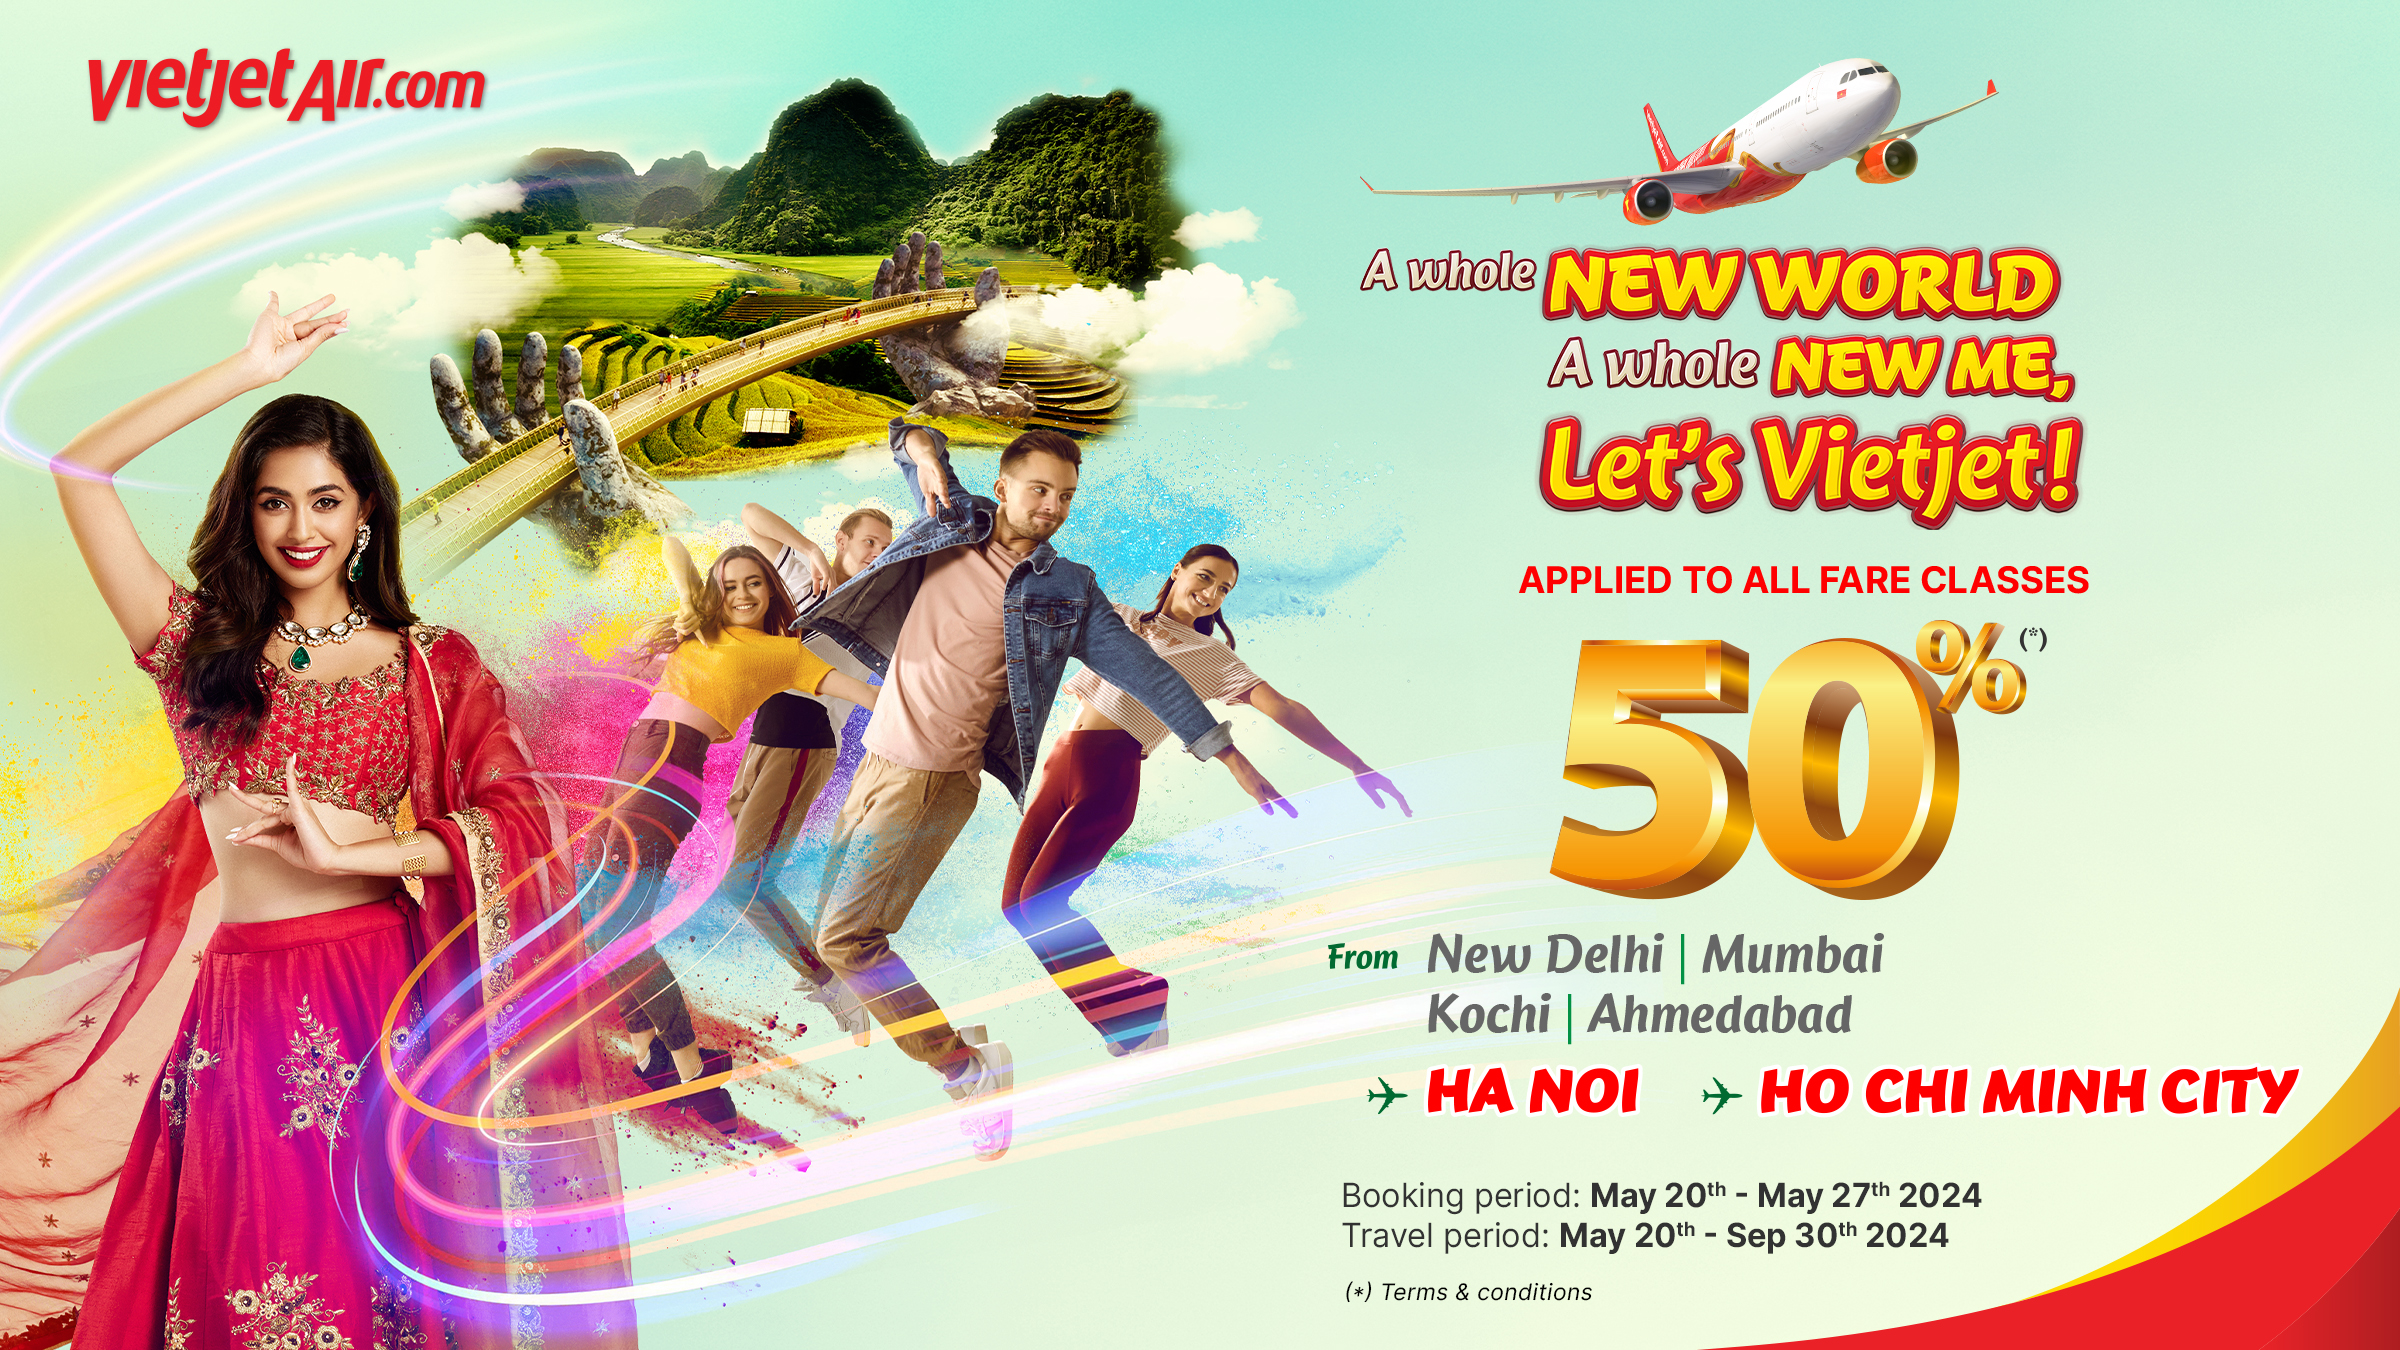 Vietjet Offers Exclusive One-Week Promotion for Indian Travelers, 50% discount on all classes!